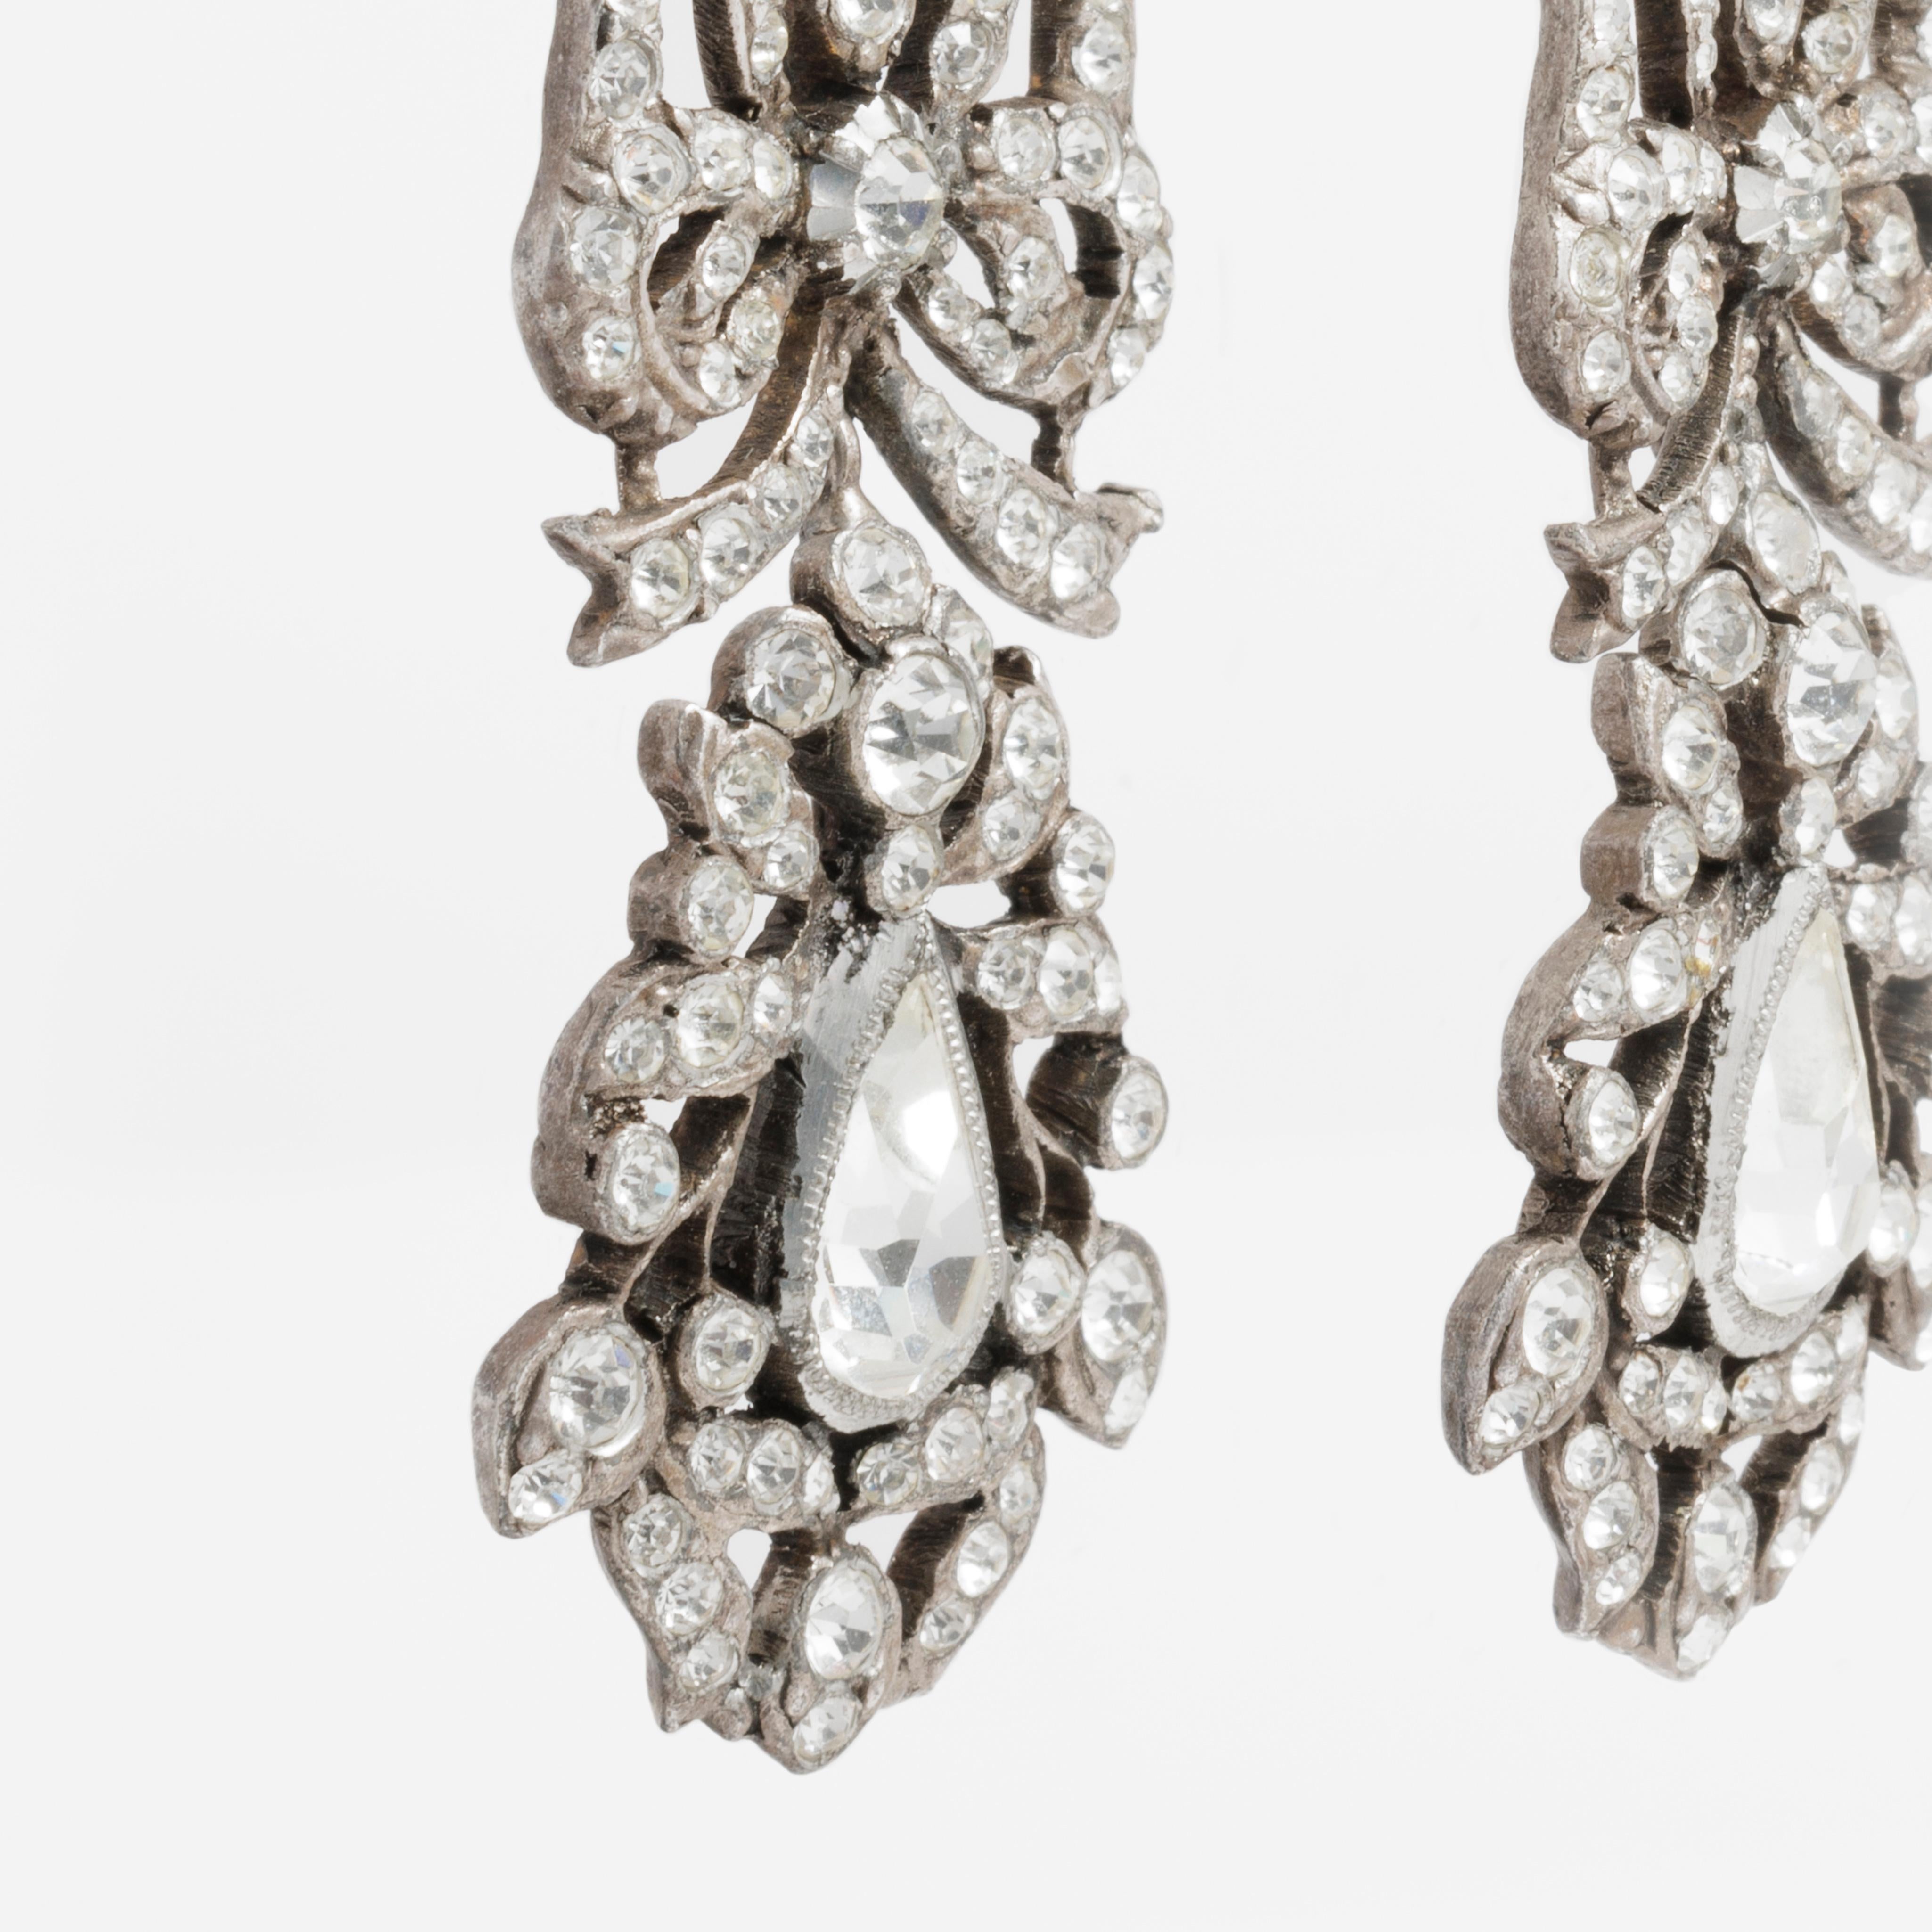 French 19th Century Silver and Clear Paste Pendeloque Chandelier Earrings For Sale 2